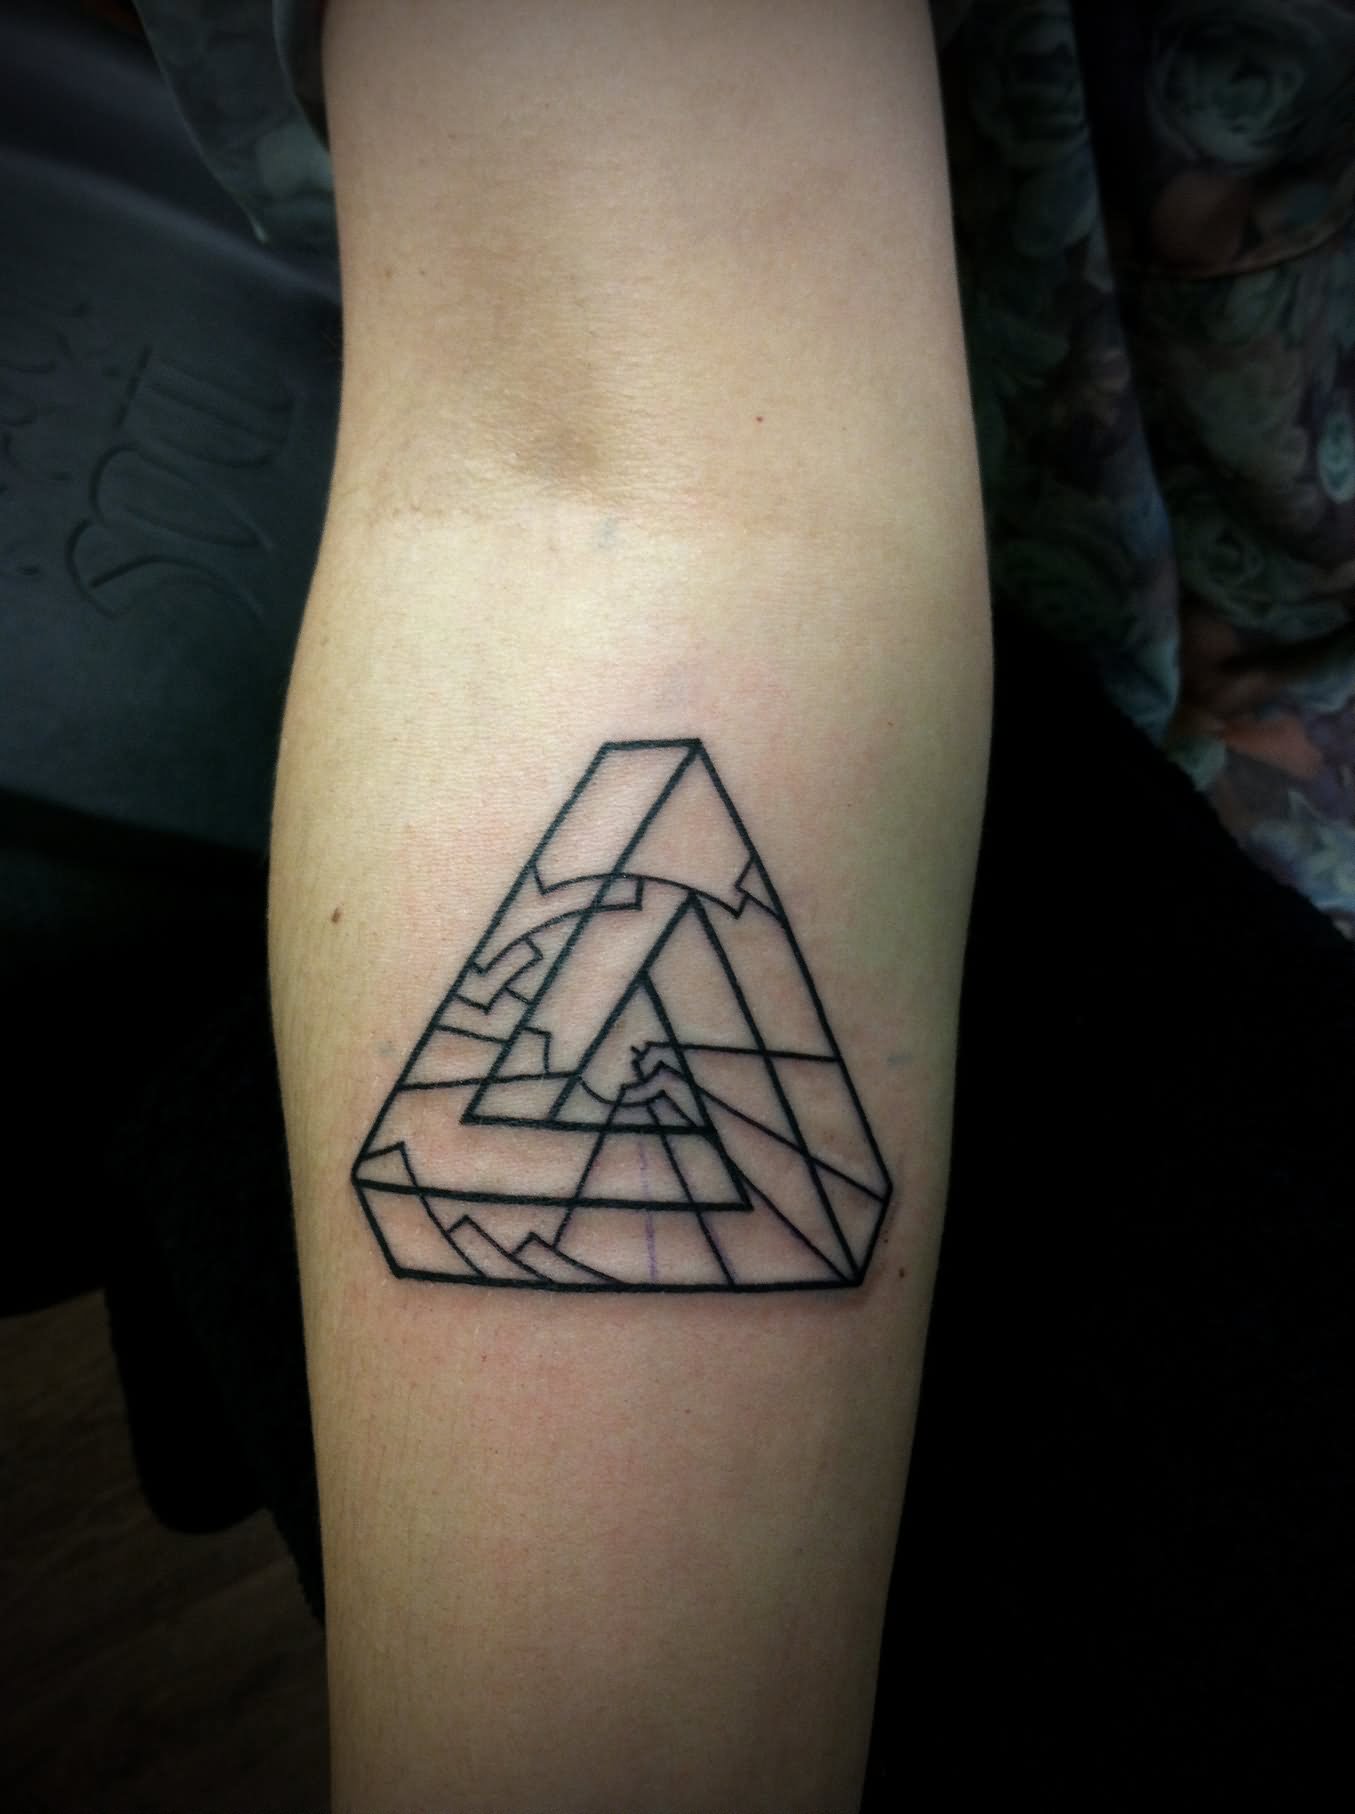 Cool Black Outline Penrose Triangle Tattoo On Right Forearm